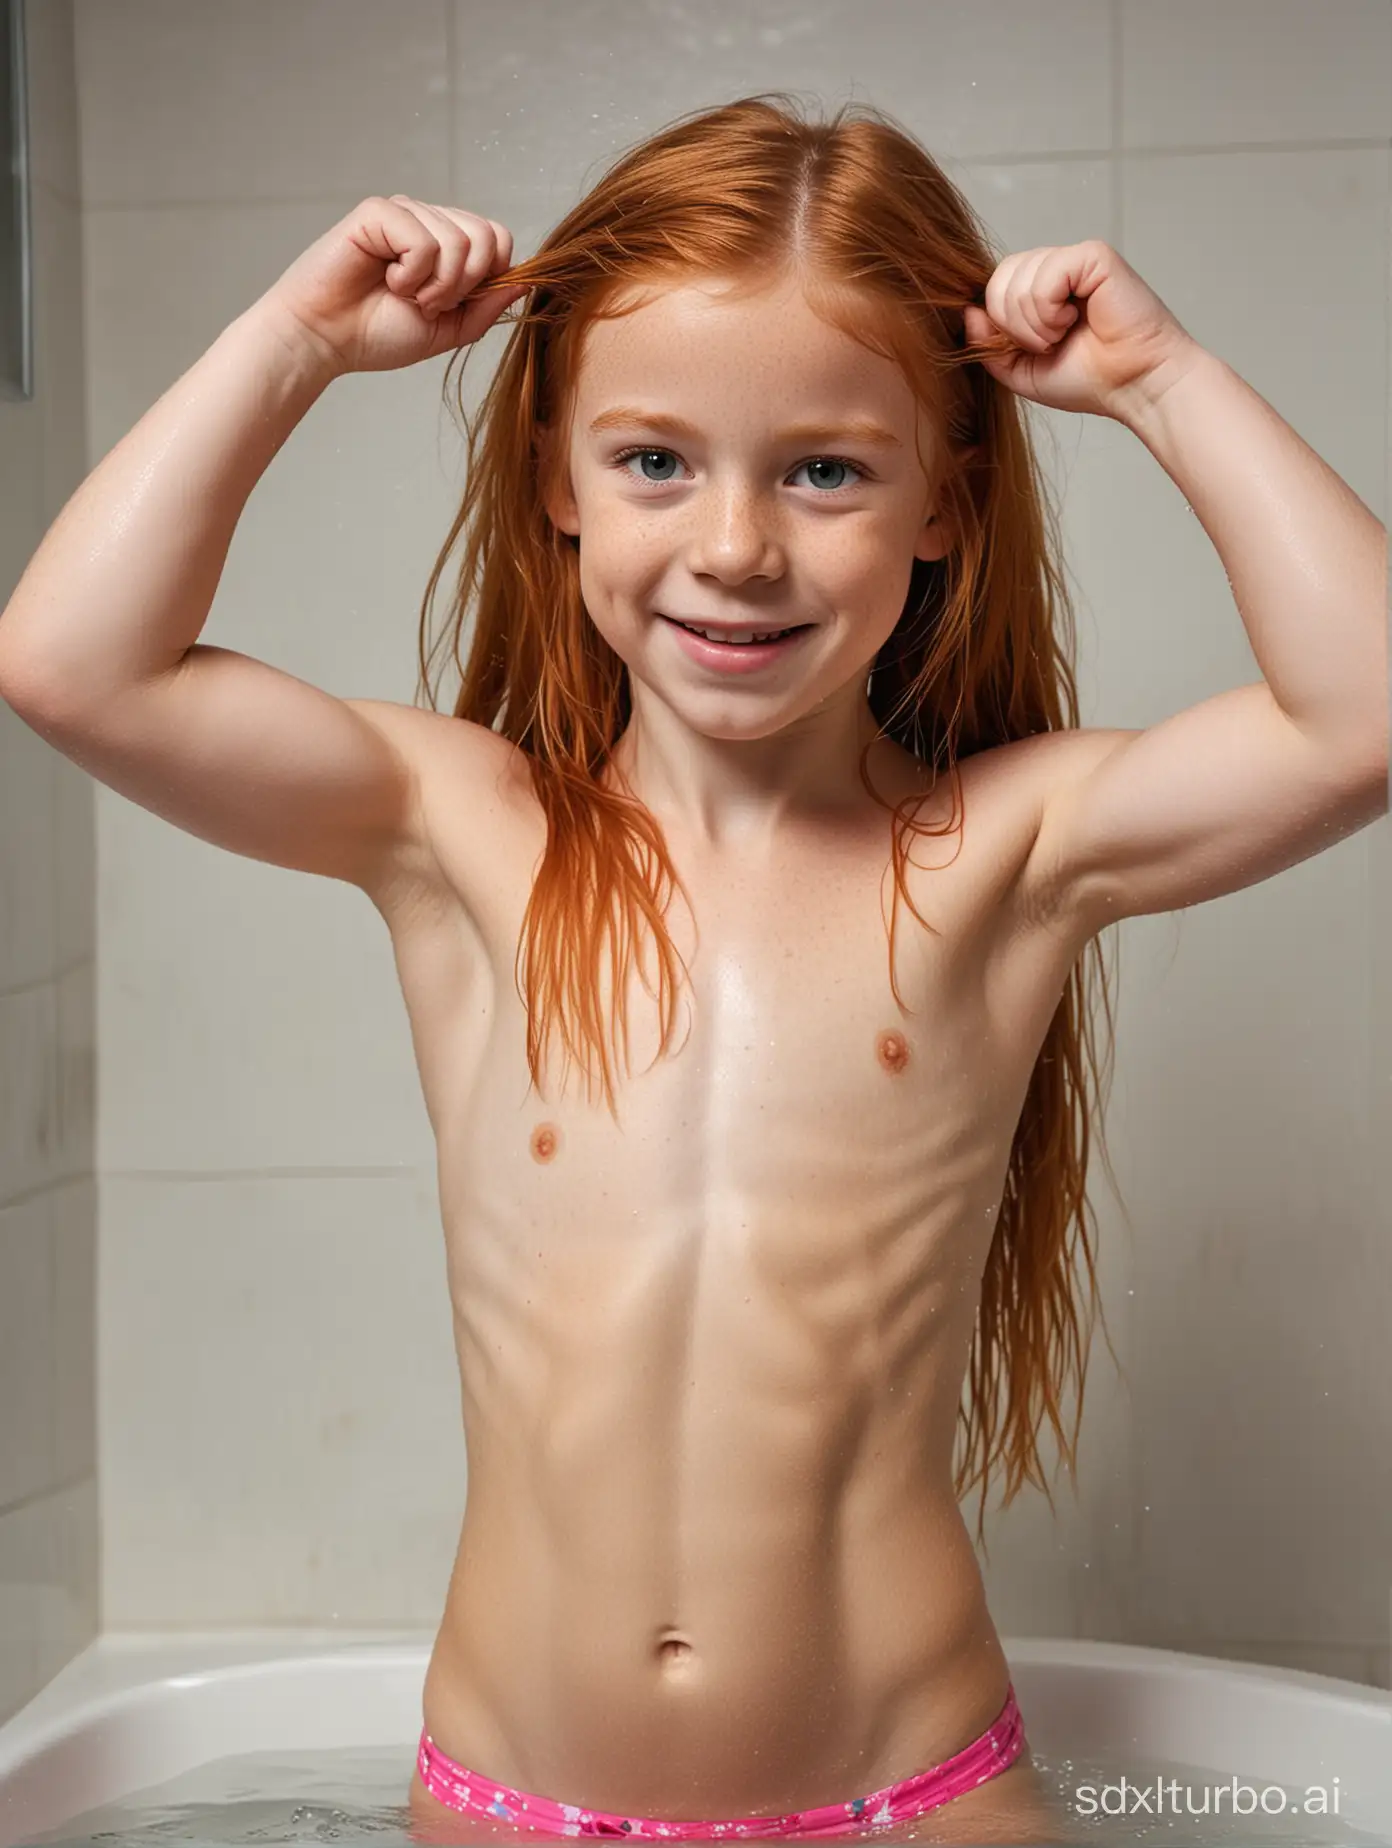 Young-Girl-with-Long-Ginger-Hair-Displaying-Muscular-Abs-While-Bathing